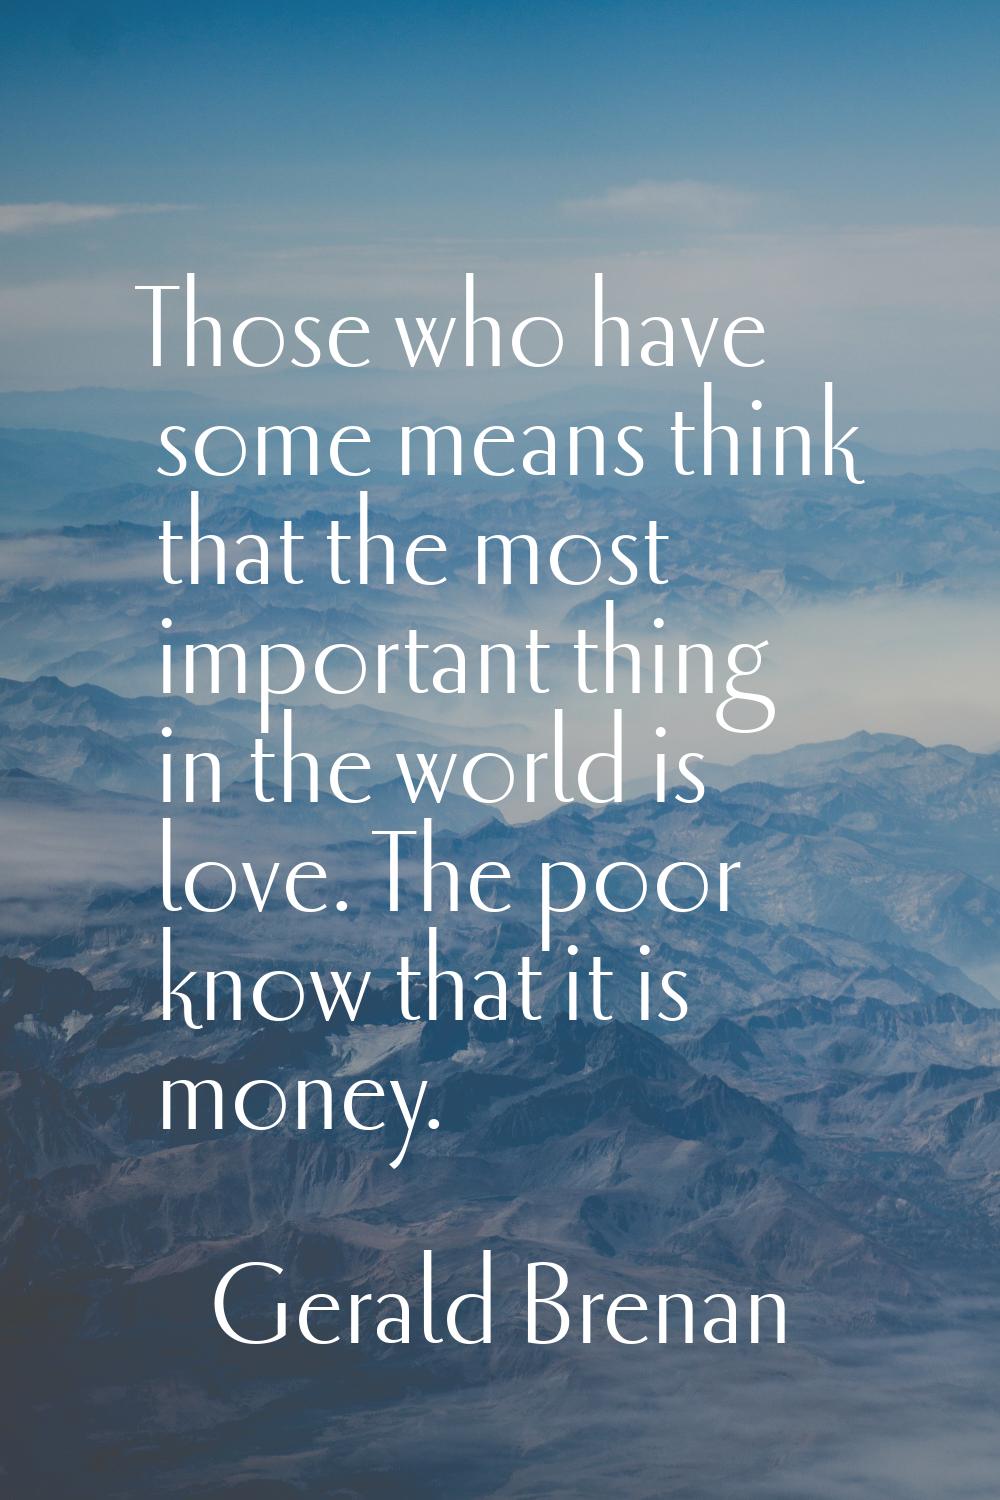 Those who have some means think that the most important thing in the world is love. The poor know t